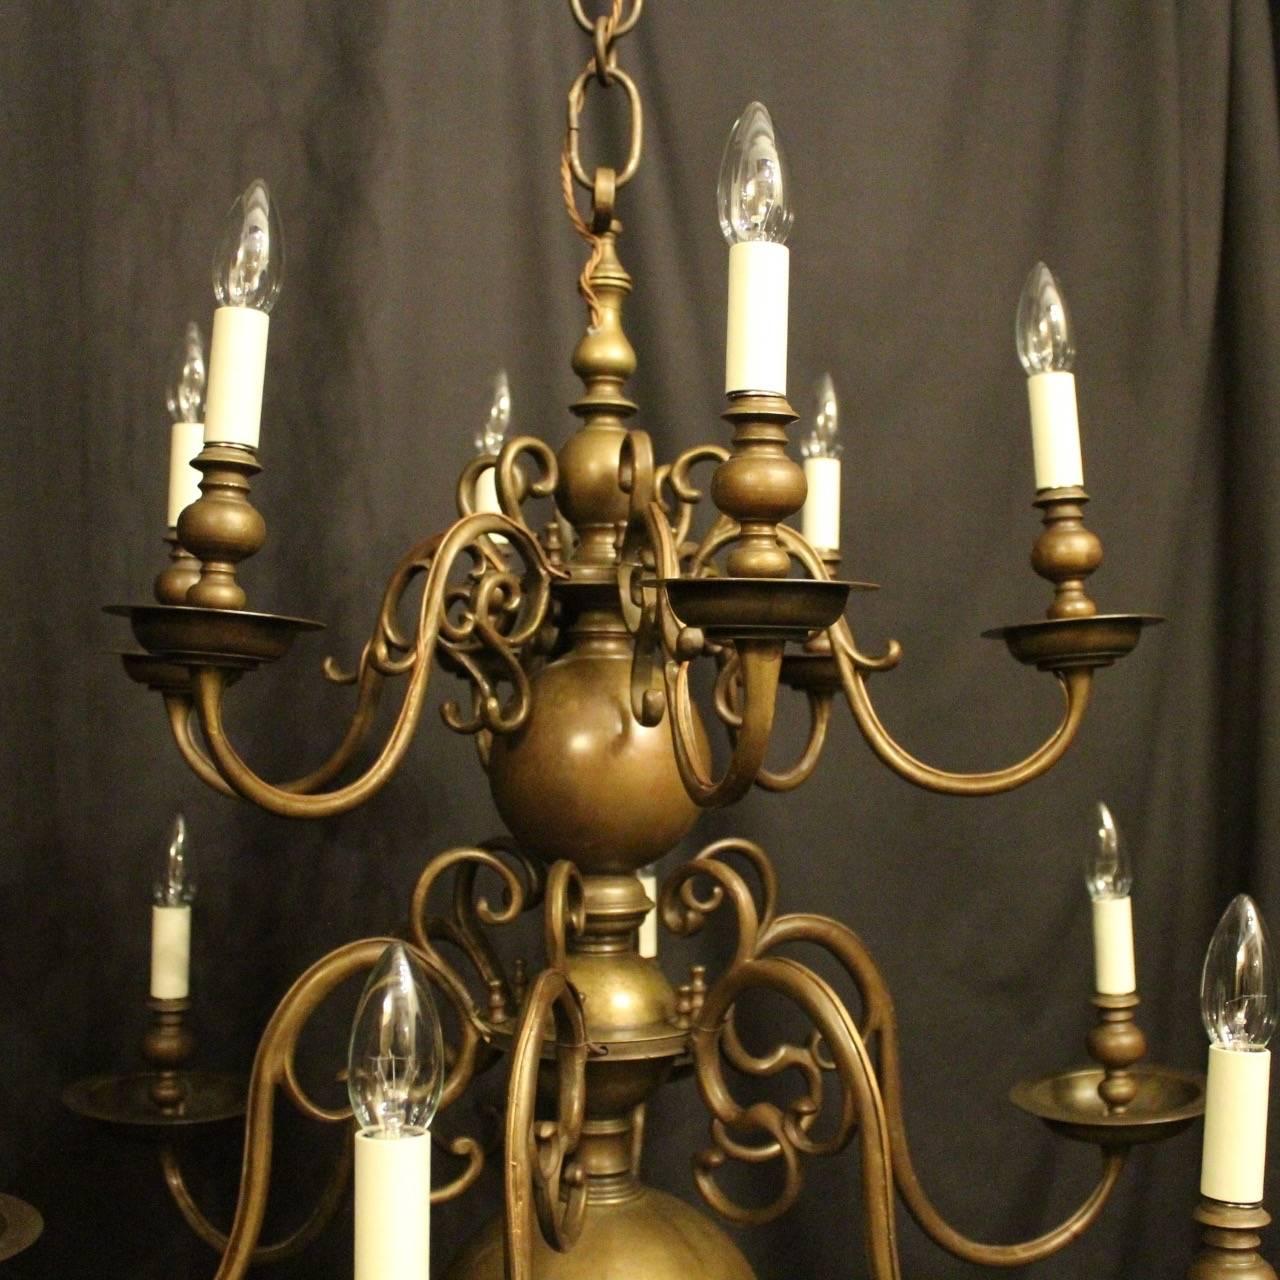 A large Flemish bronze twelve-light double tiered antique candle chandelier, the removable scrolling arms with large stepped circular bobeche drip pans and bulbous candle sconces, issuing from a knopped central column with pierced ring finial with